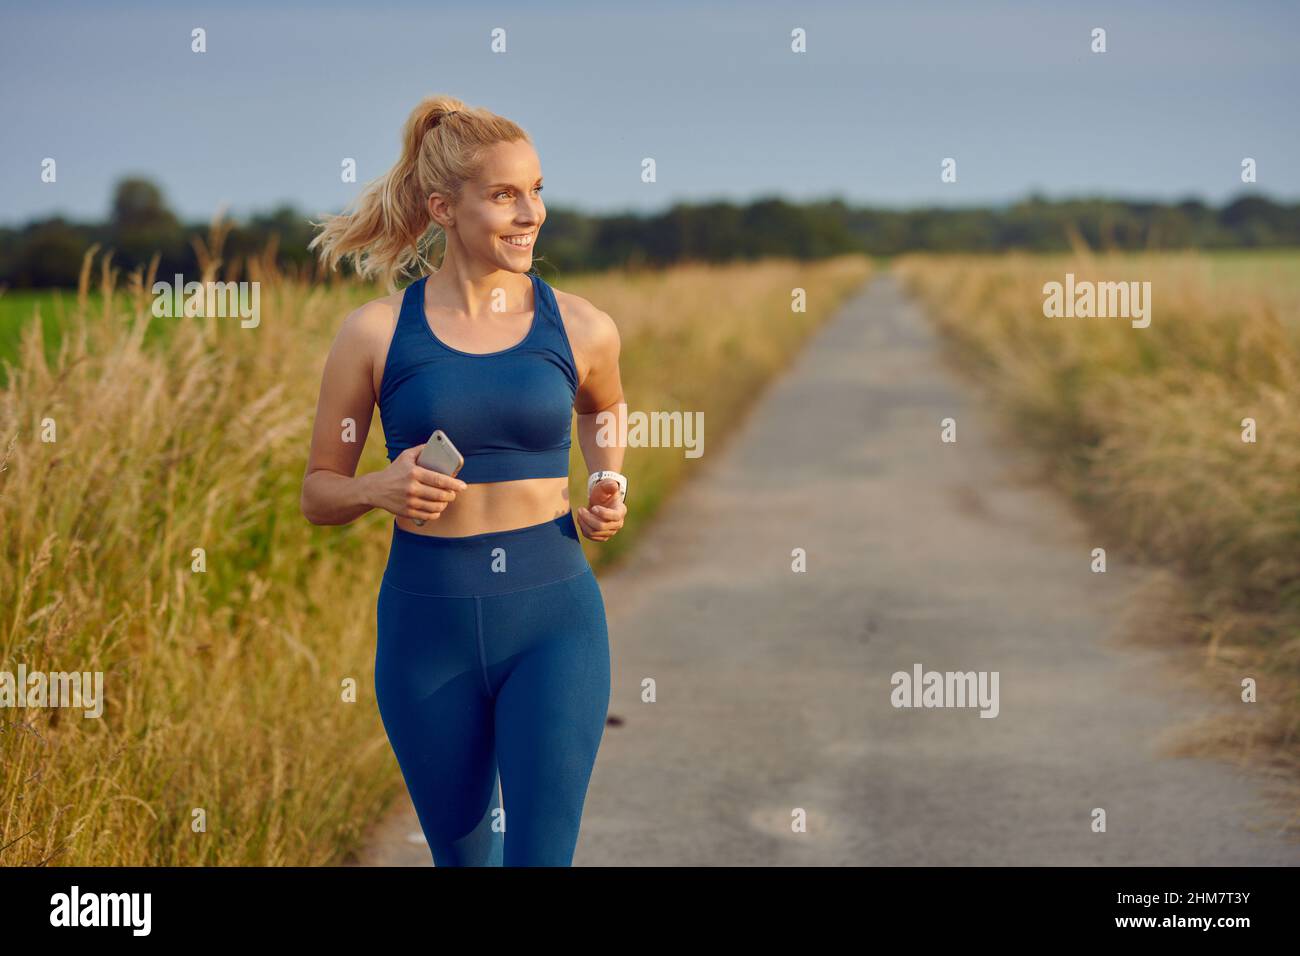 Fit healthy young woman enjoying a jog along a country road passing the camera with a happy smile full of vitality in an active lifestyle concept Stock Photo